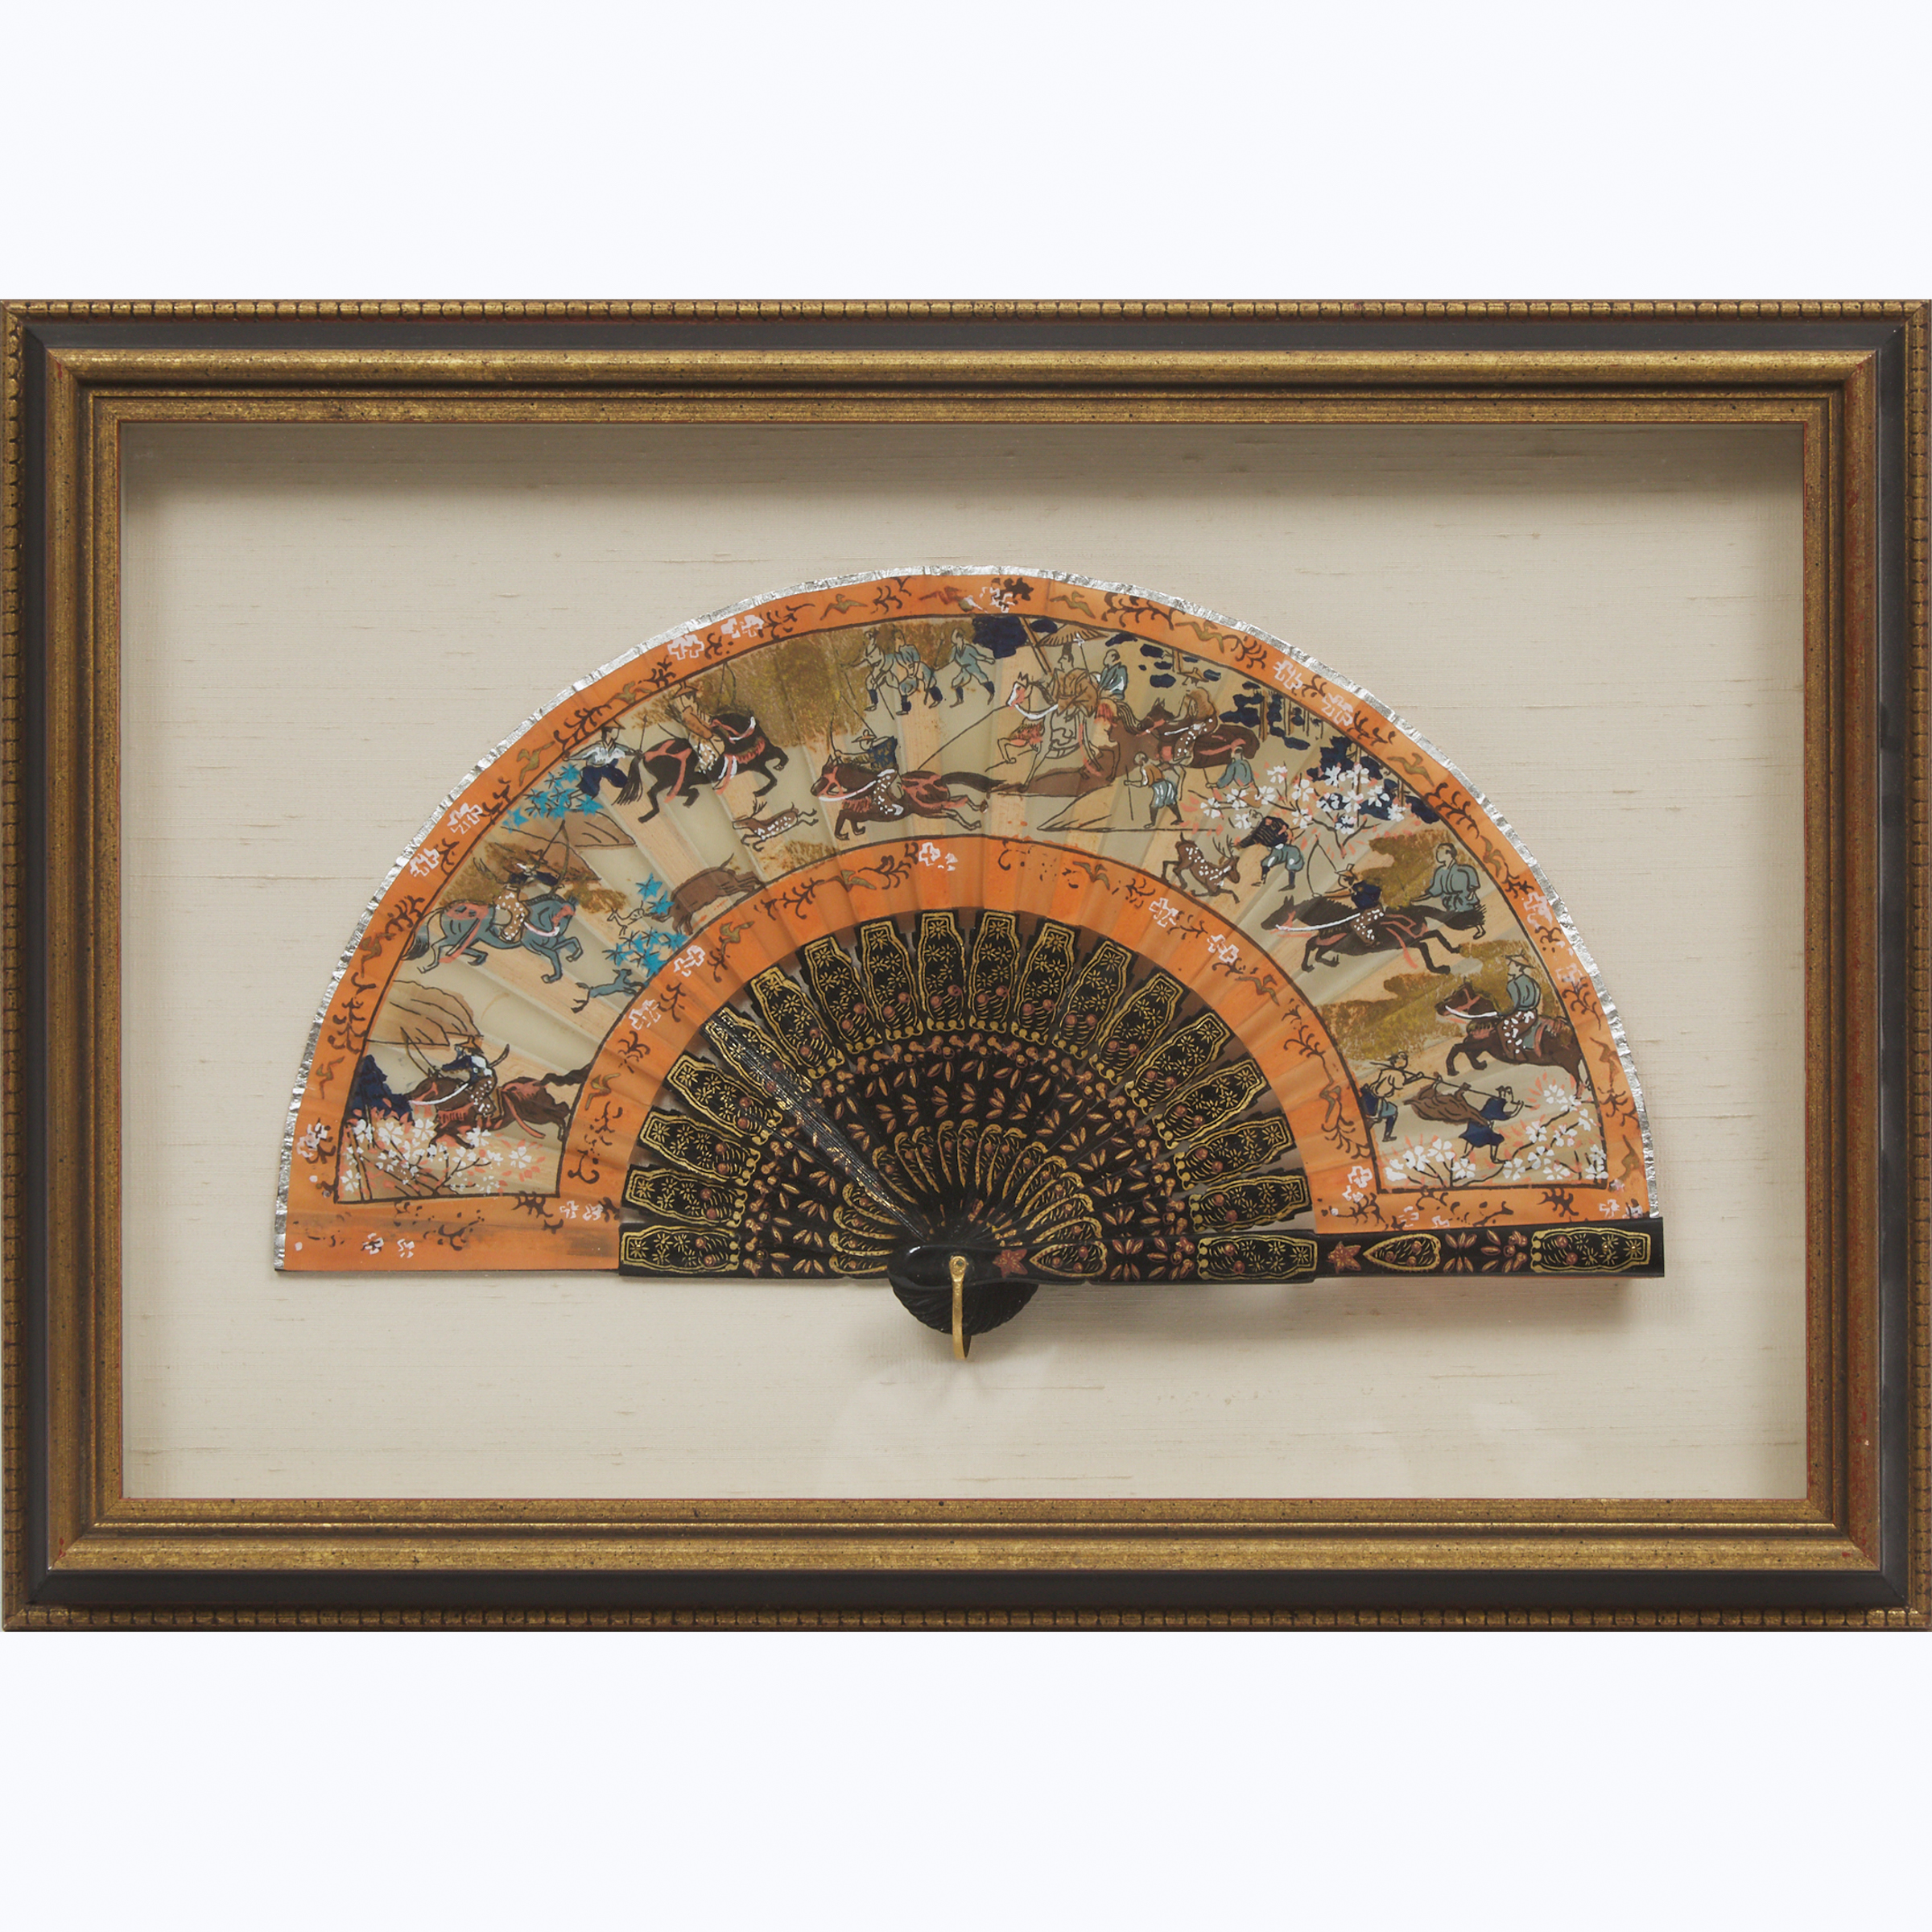 Frame Cased Japanese Woodblock Fan, mid 20th century